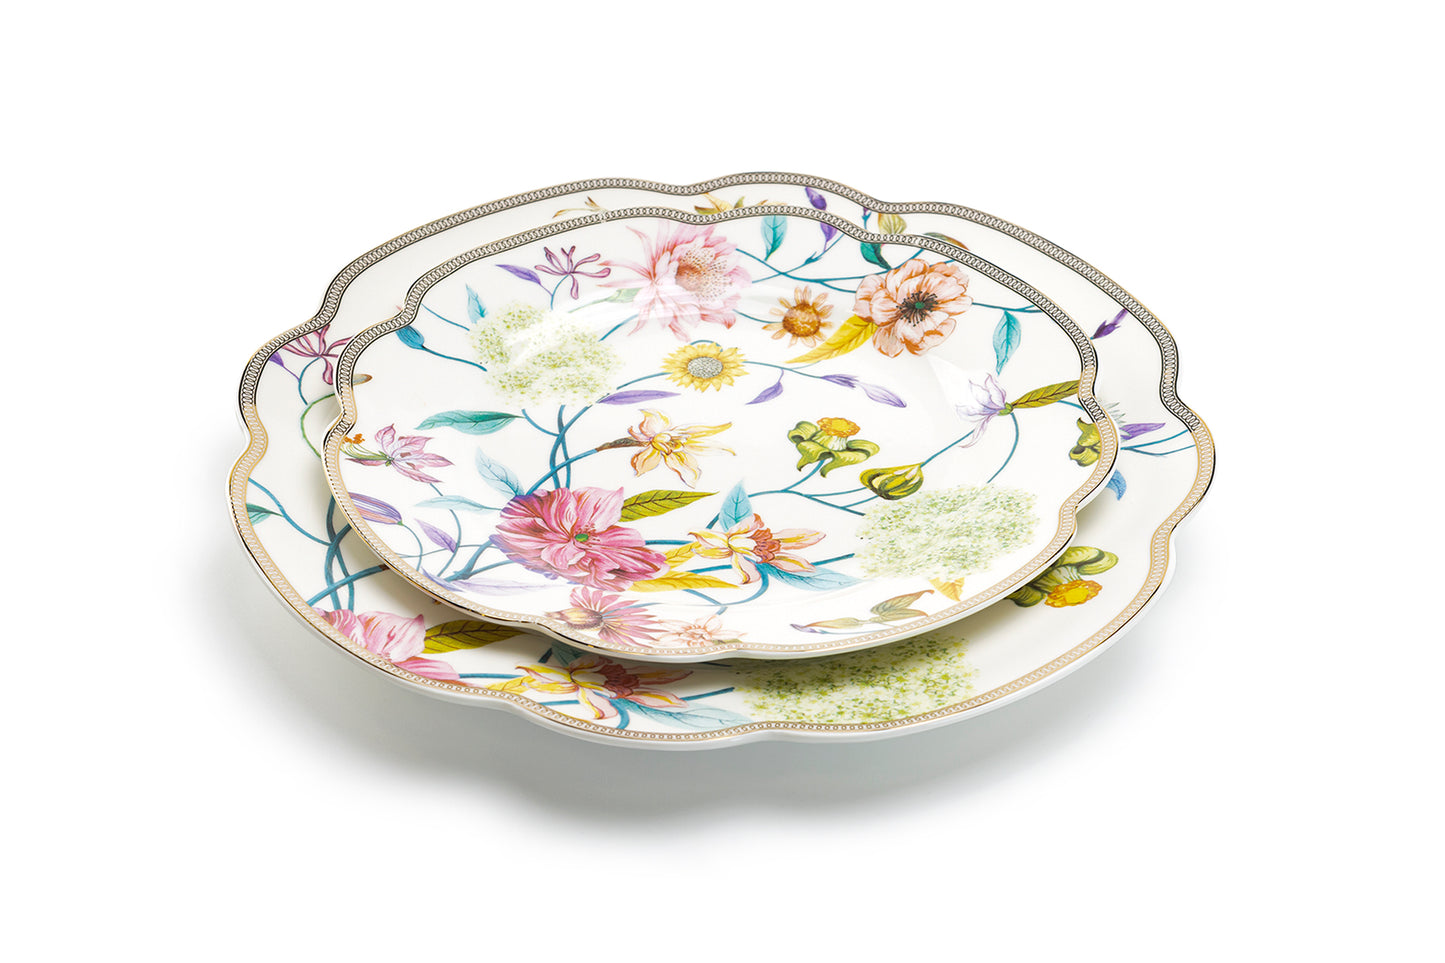 Spring Flowers with Hummingbird Fine Porcelain Tea Cup and Saucer